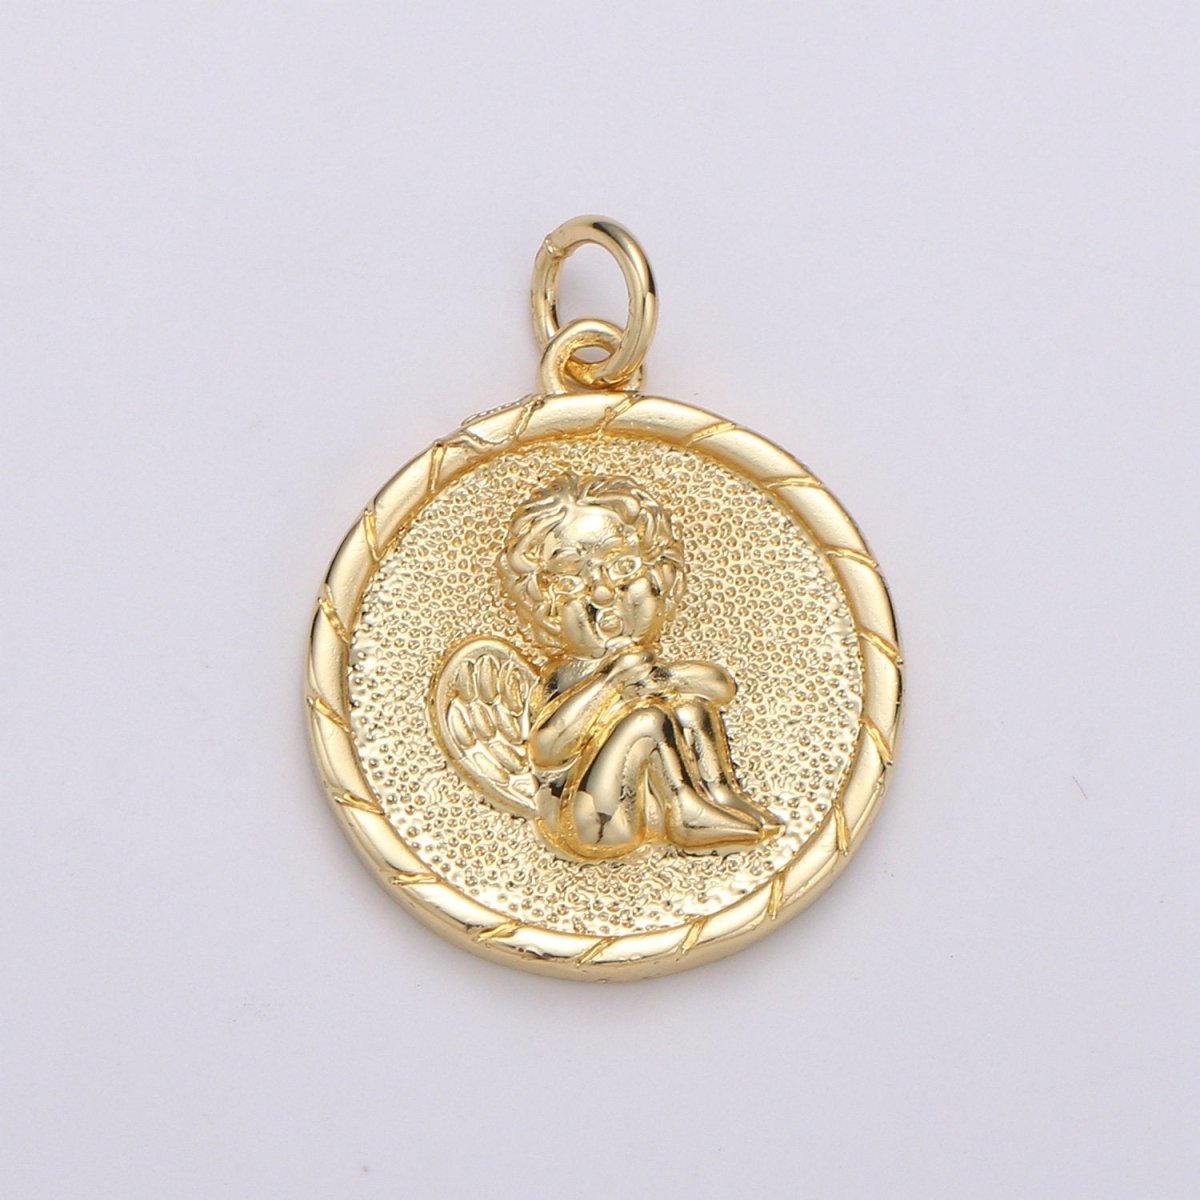 14K Gold Filled Cherub pendant - Little Angel- Necklace Charm - Coin Disc Charm- gift for Daughter- Jewelry Findings - Charm For Necklace D-718 - DLUXCA